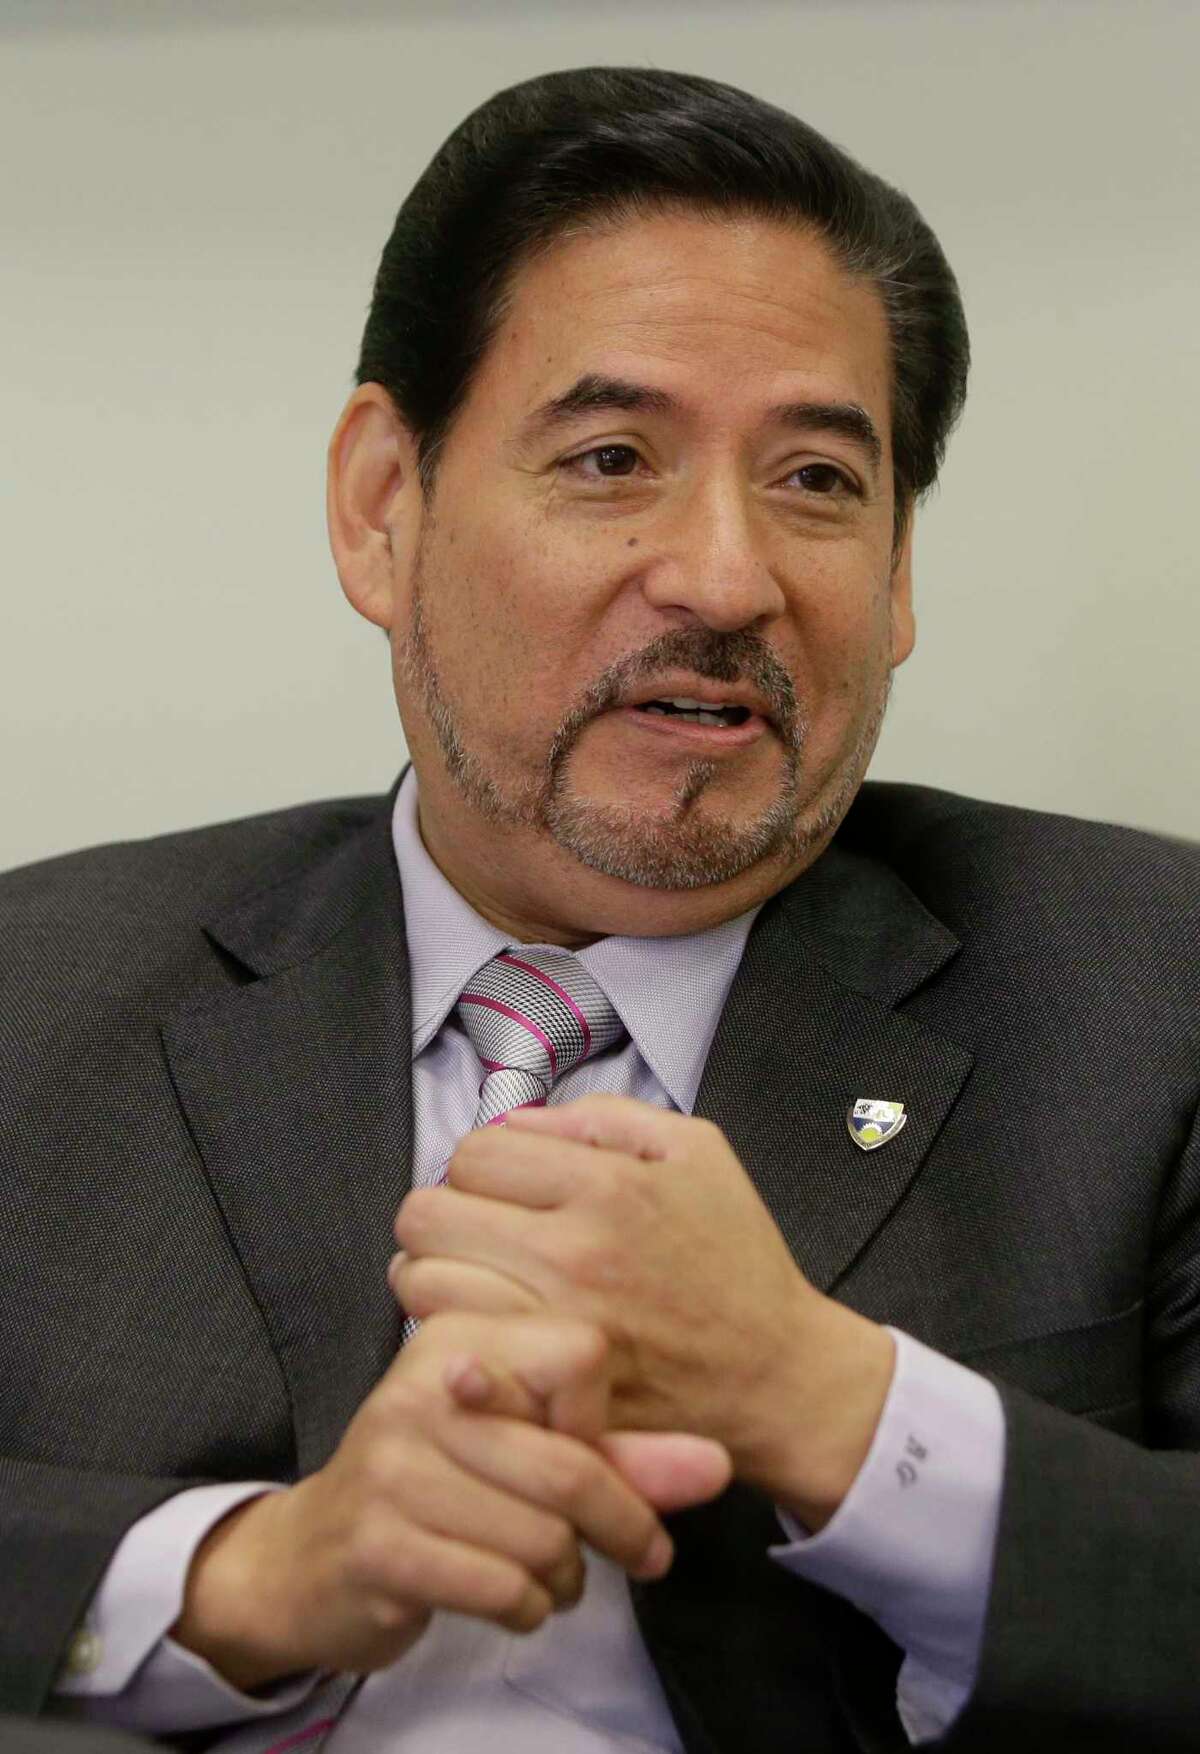 Richard Garza, CEO and superintendent of Houston Gateway Academy, shown here in April 2017 file photo. ( Melissa Phillip / Houston Chronicle )